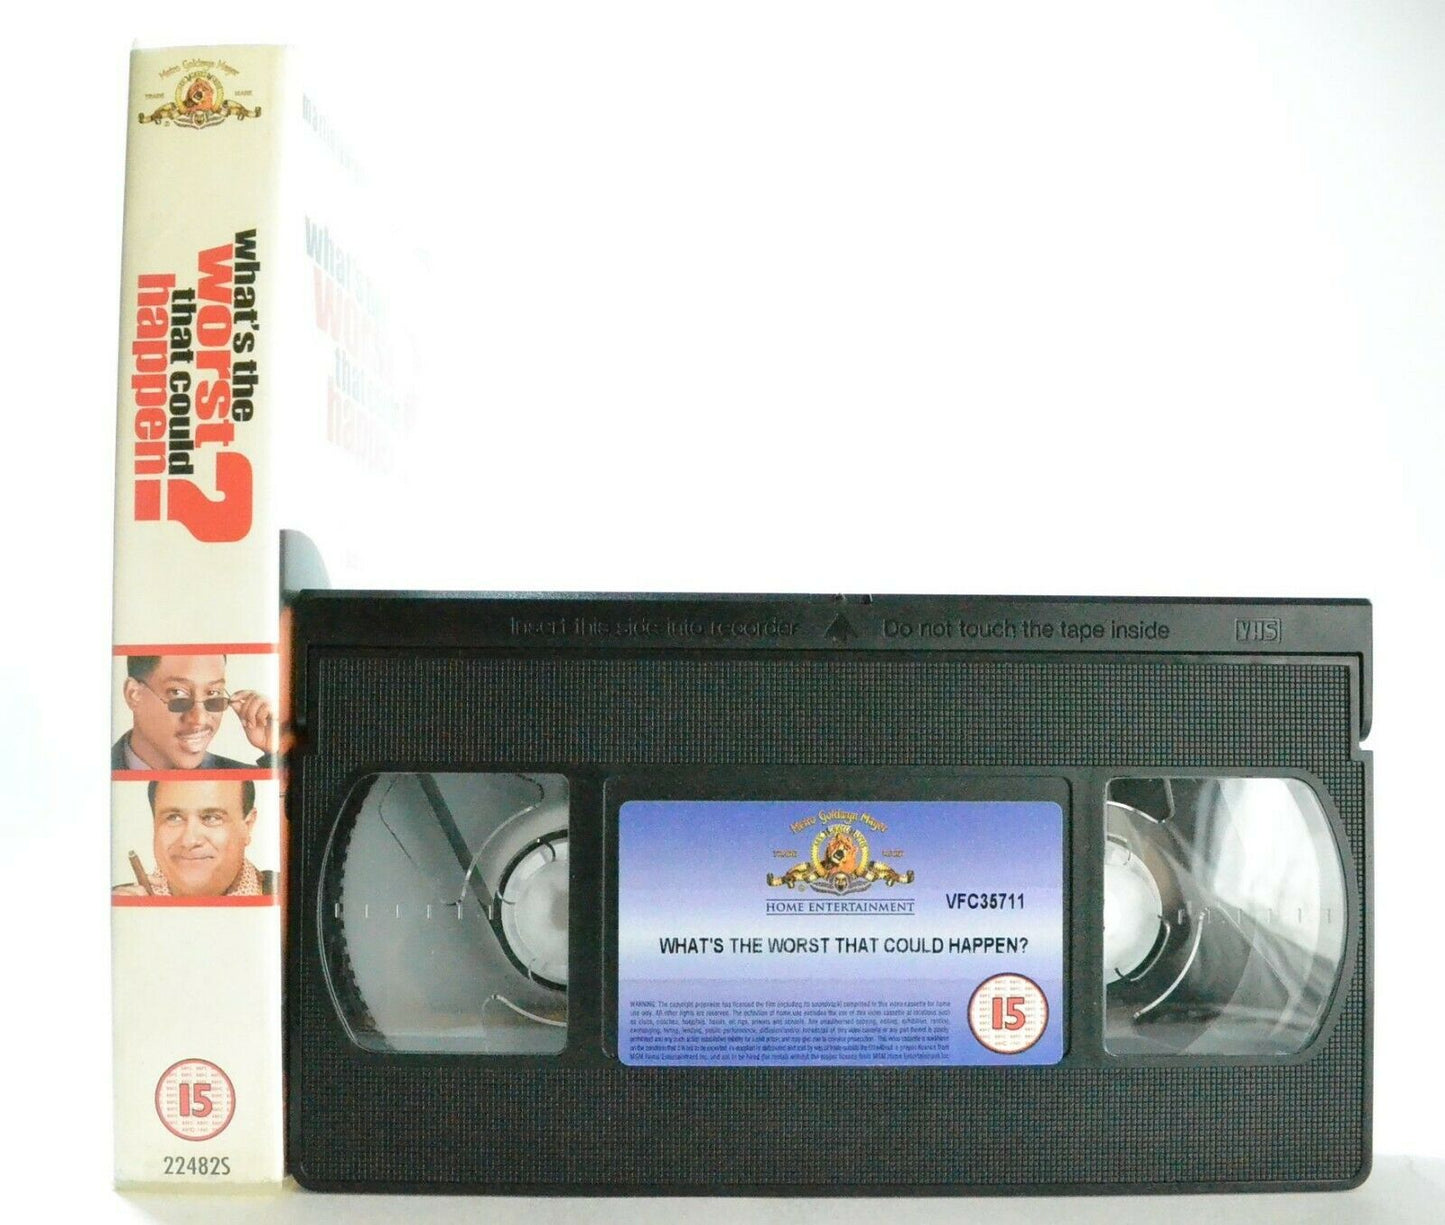 What's The Worst That Could Happen?: Comedy (2001) - M.Lawrence/D.DeVito - VHS-